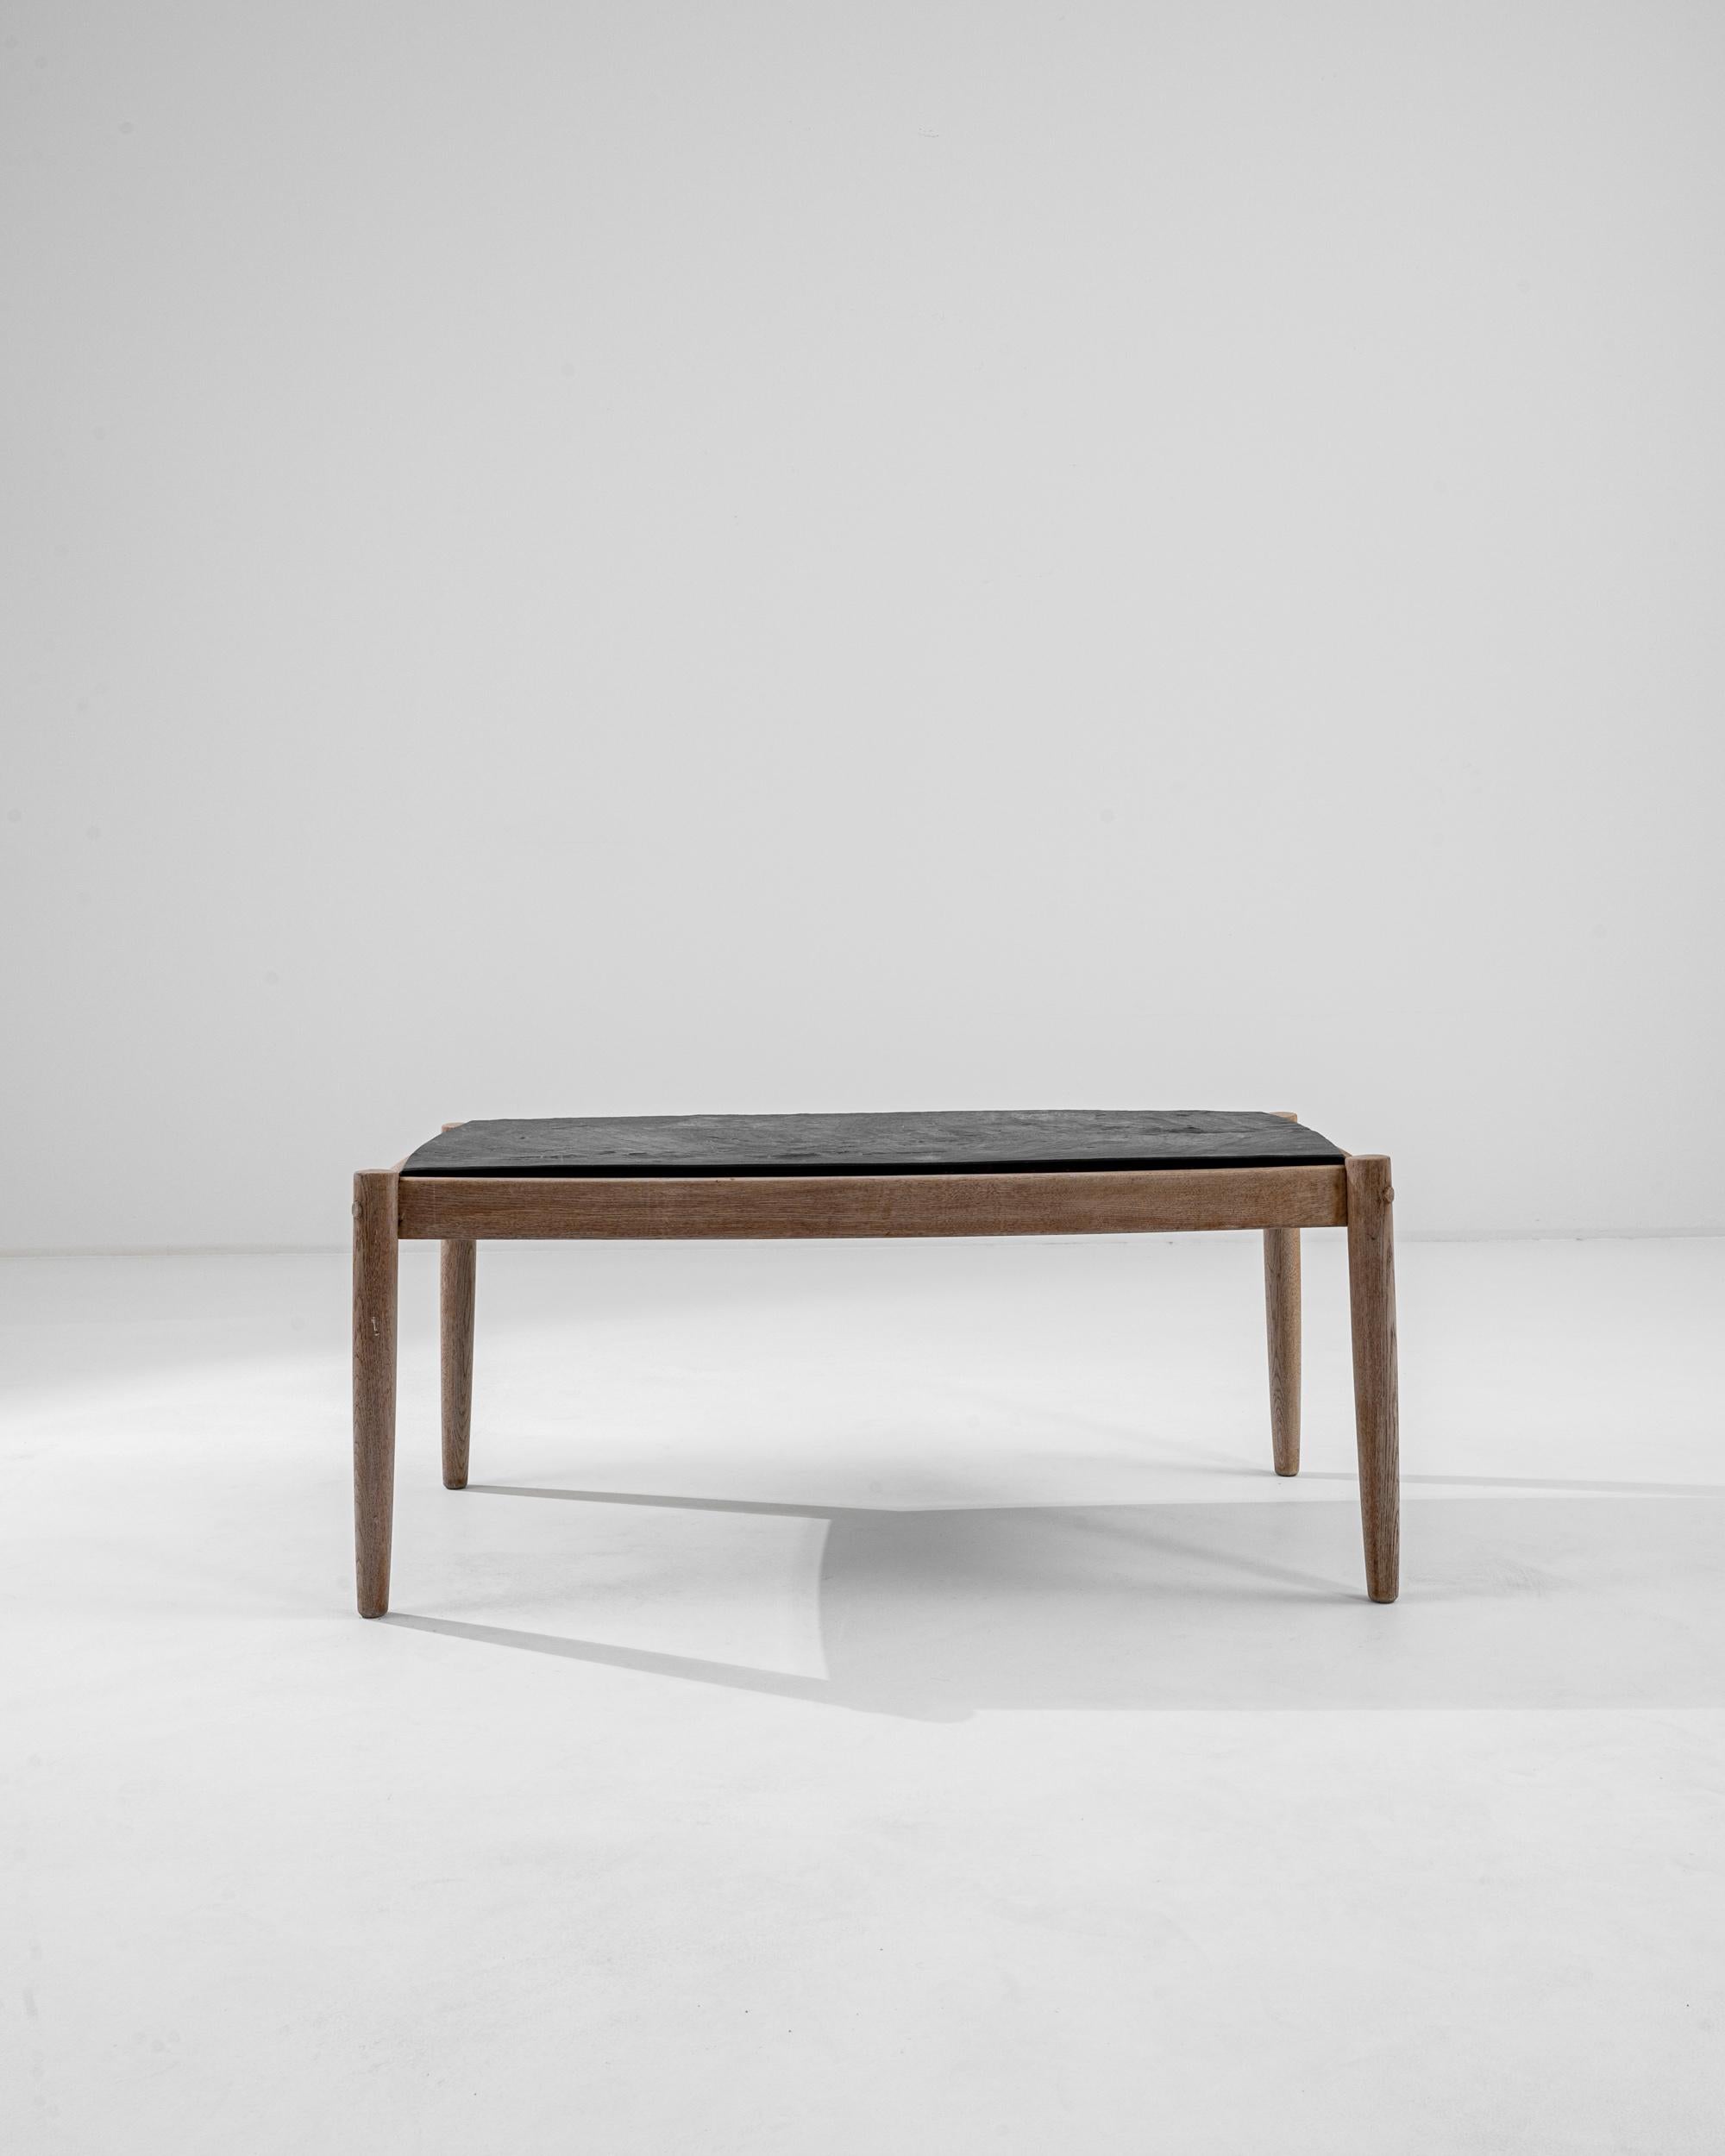 A wooden coffee table with a stone top made in 20th century Belgium. A simple construction composed of four legs, aprons, and a stone top paints an image of contemplative elemental simplicity. The stone top that rests upon freshly bleached oak